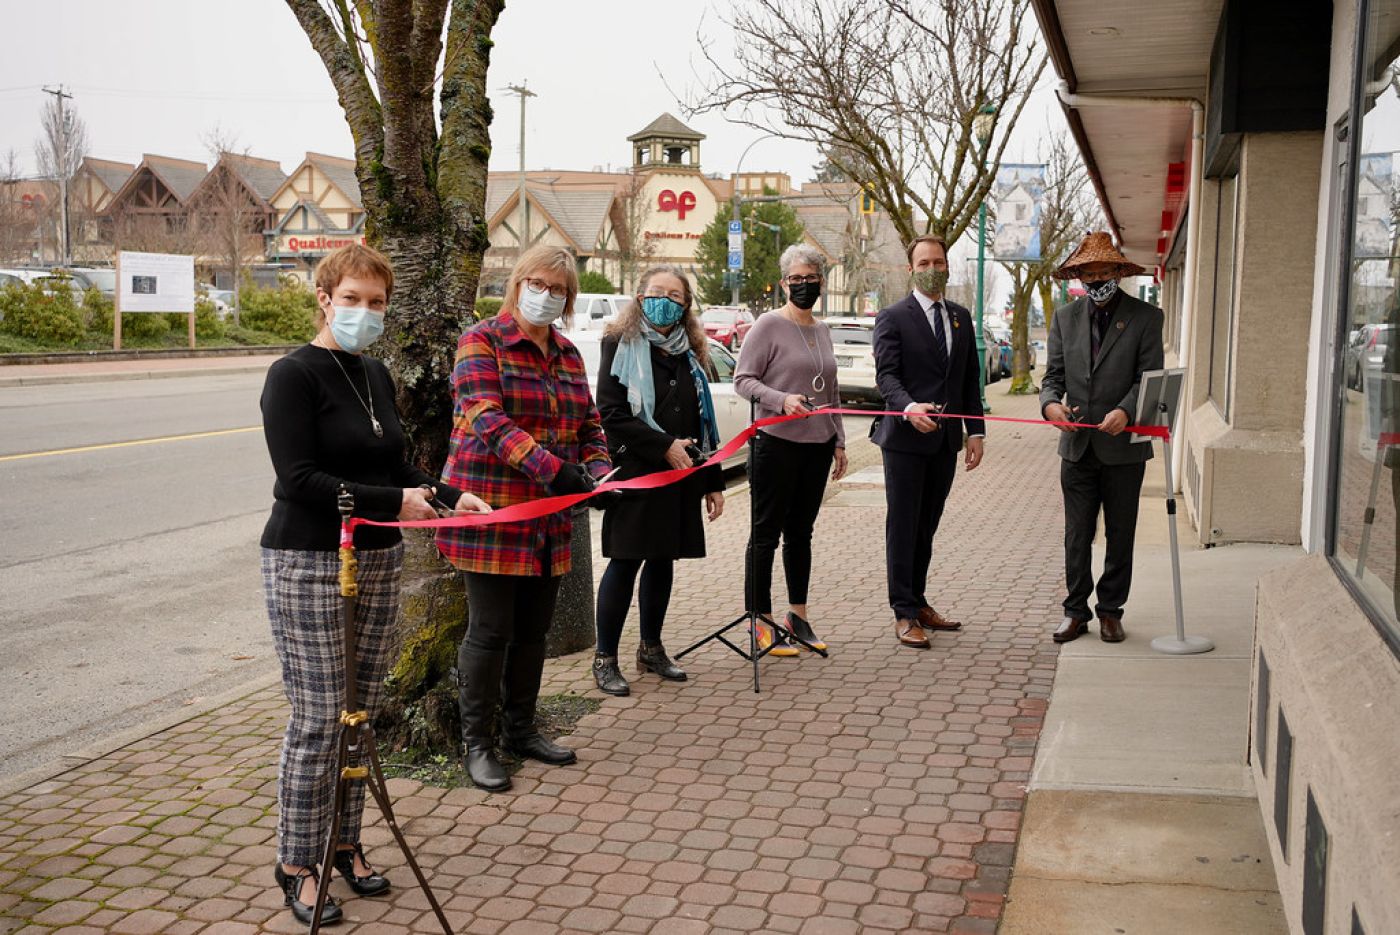 Local government officials cutting the ribbon at the Flowerstone Health Clinic in Qualicum Beach.